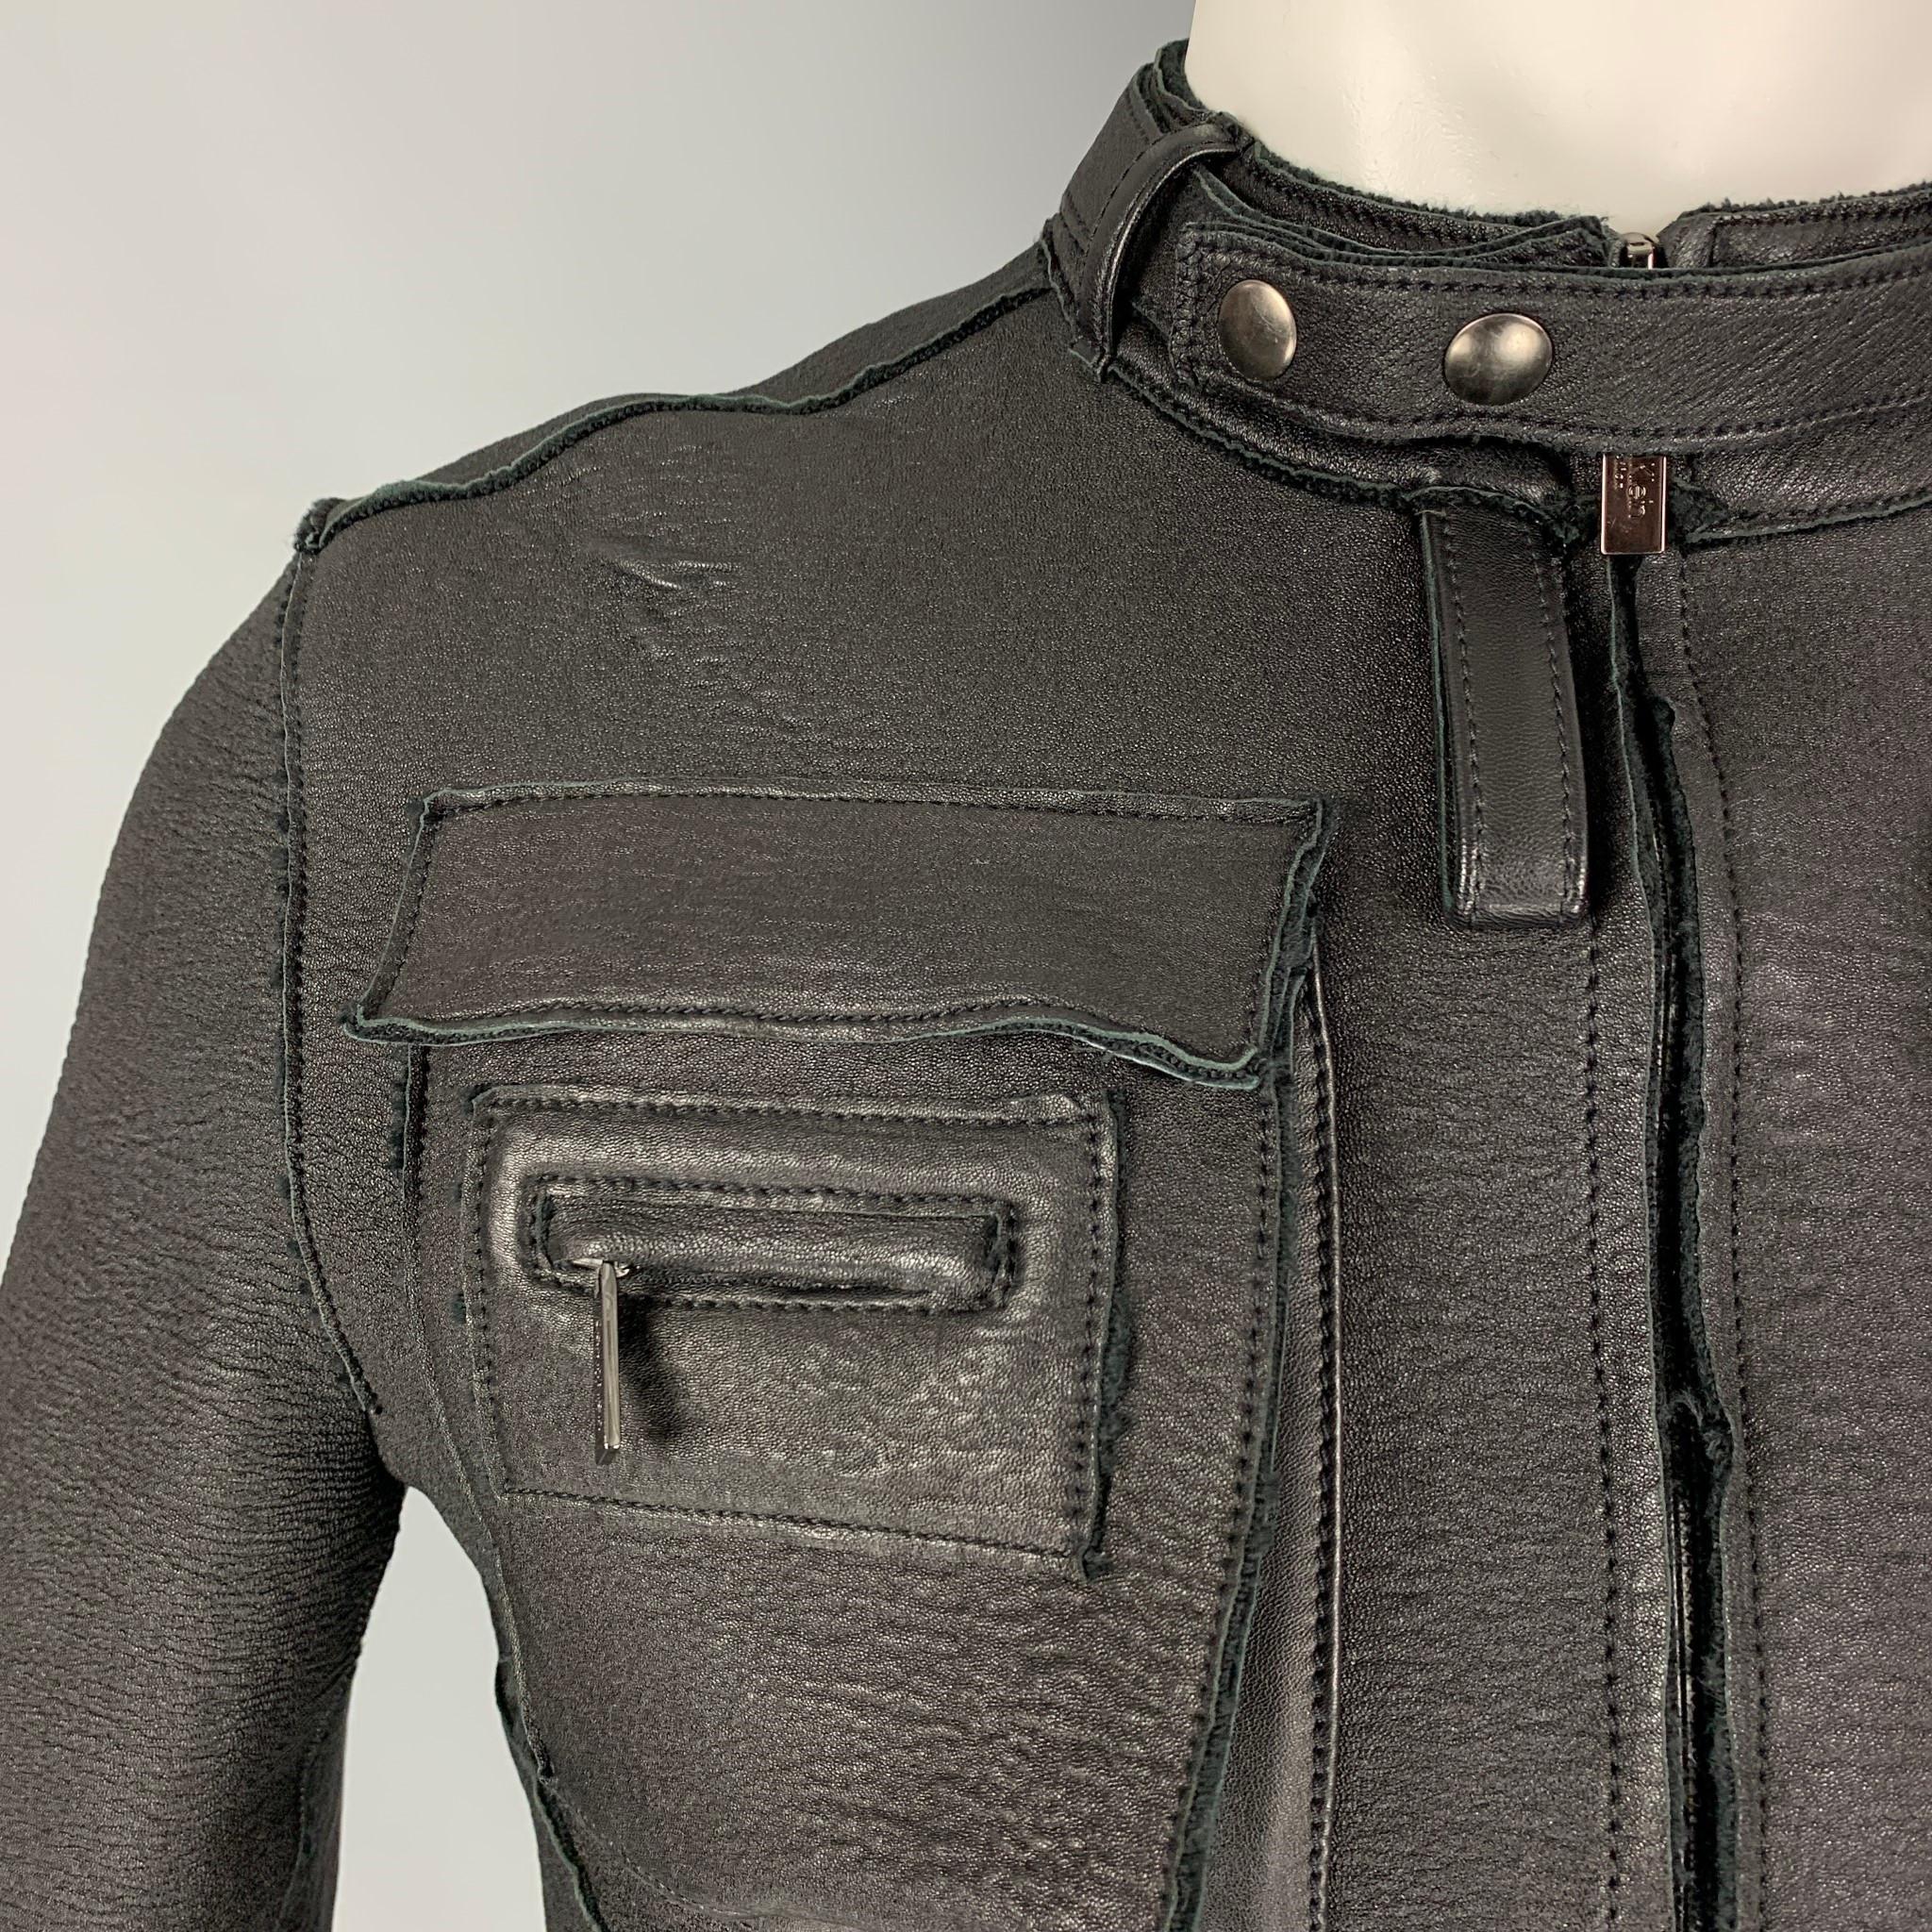 CALVIN KLEIN COLLECTION jacket comes in a black leather with a full liner featuring a motorcycle style, multiple front pockets, removable front collar strap, and a full zip up closure. Made in Italy. 

Very Good Pre-Owned Condition.
Marked: